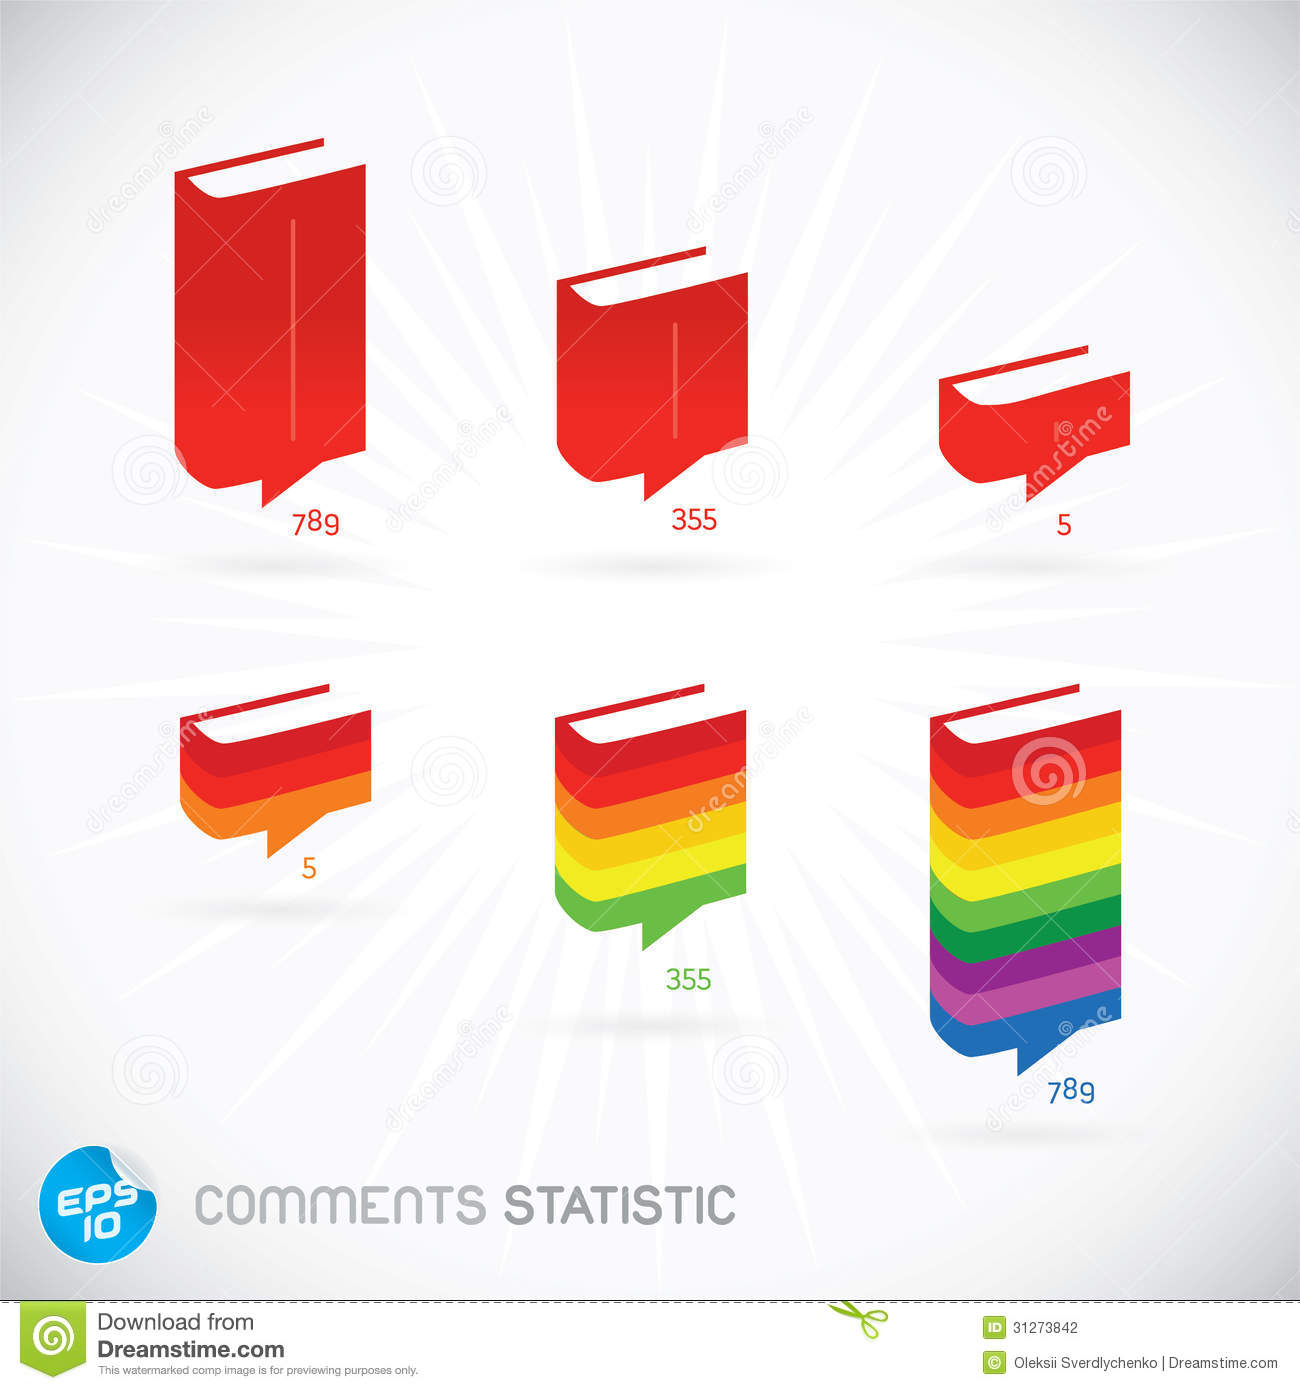 Comments Statistic Symbols Stock Photography   Image  31273842